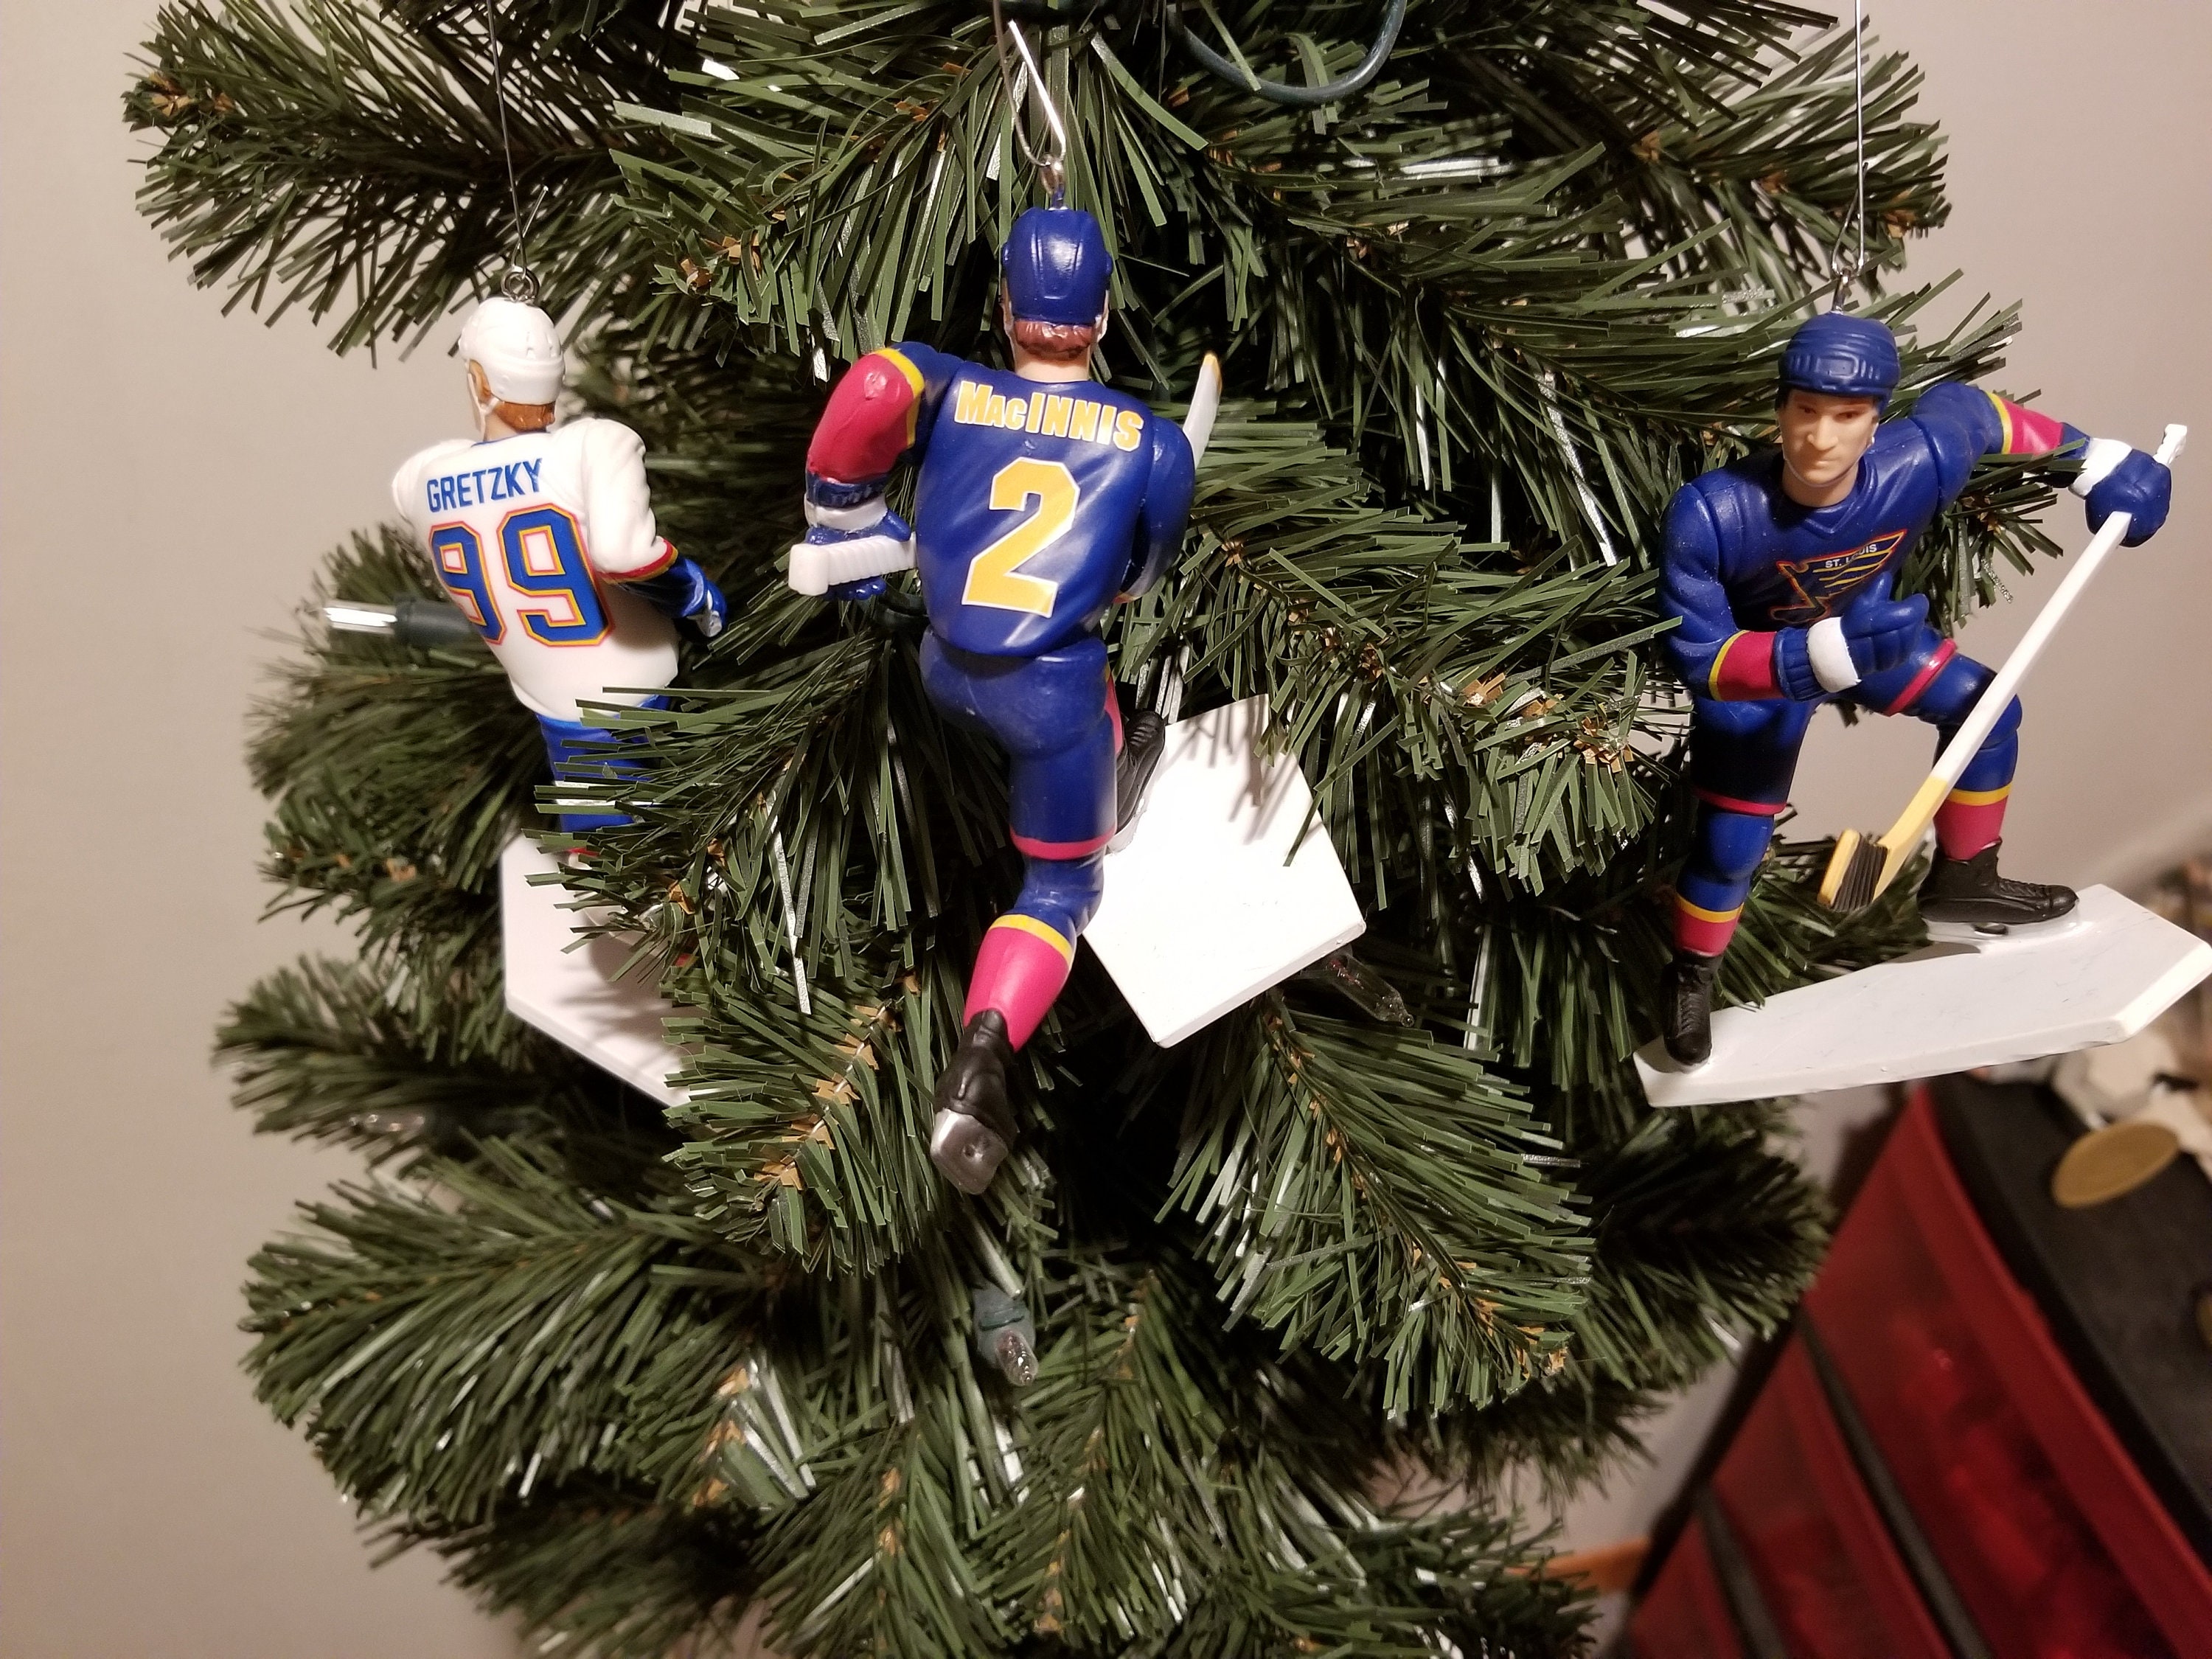 NHL Hockey Personalized Ornament, St. Louis Blues® - Personalized Ornaments  - Hallmark